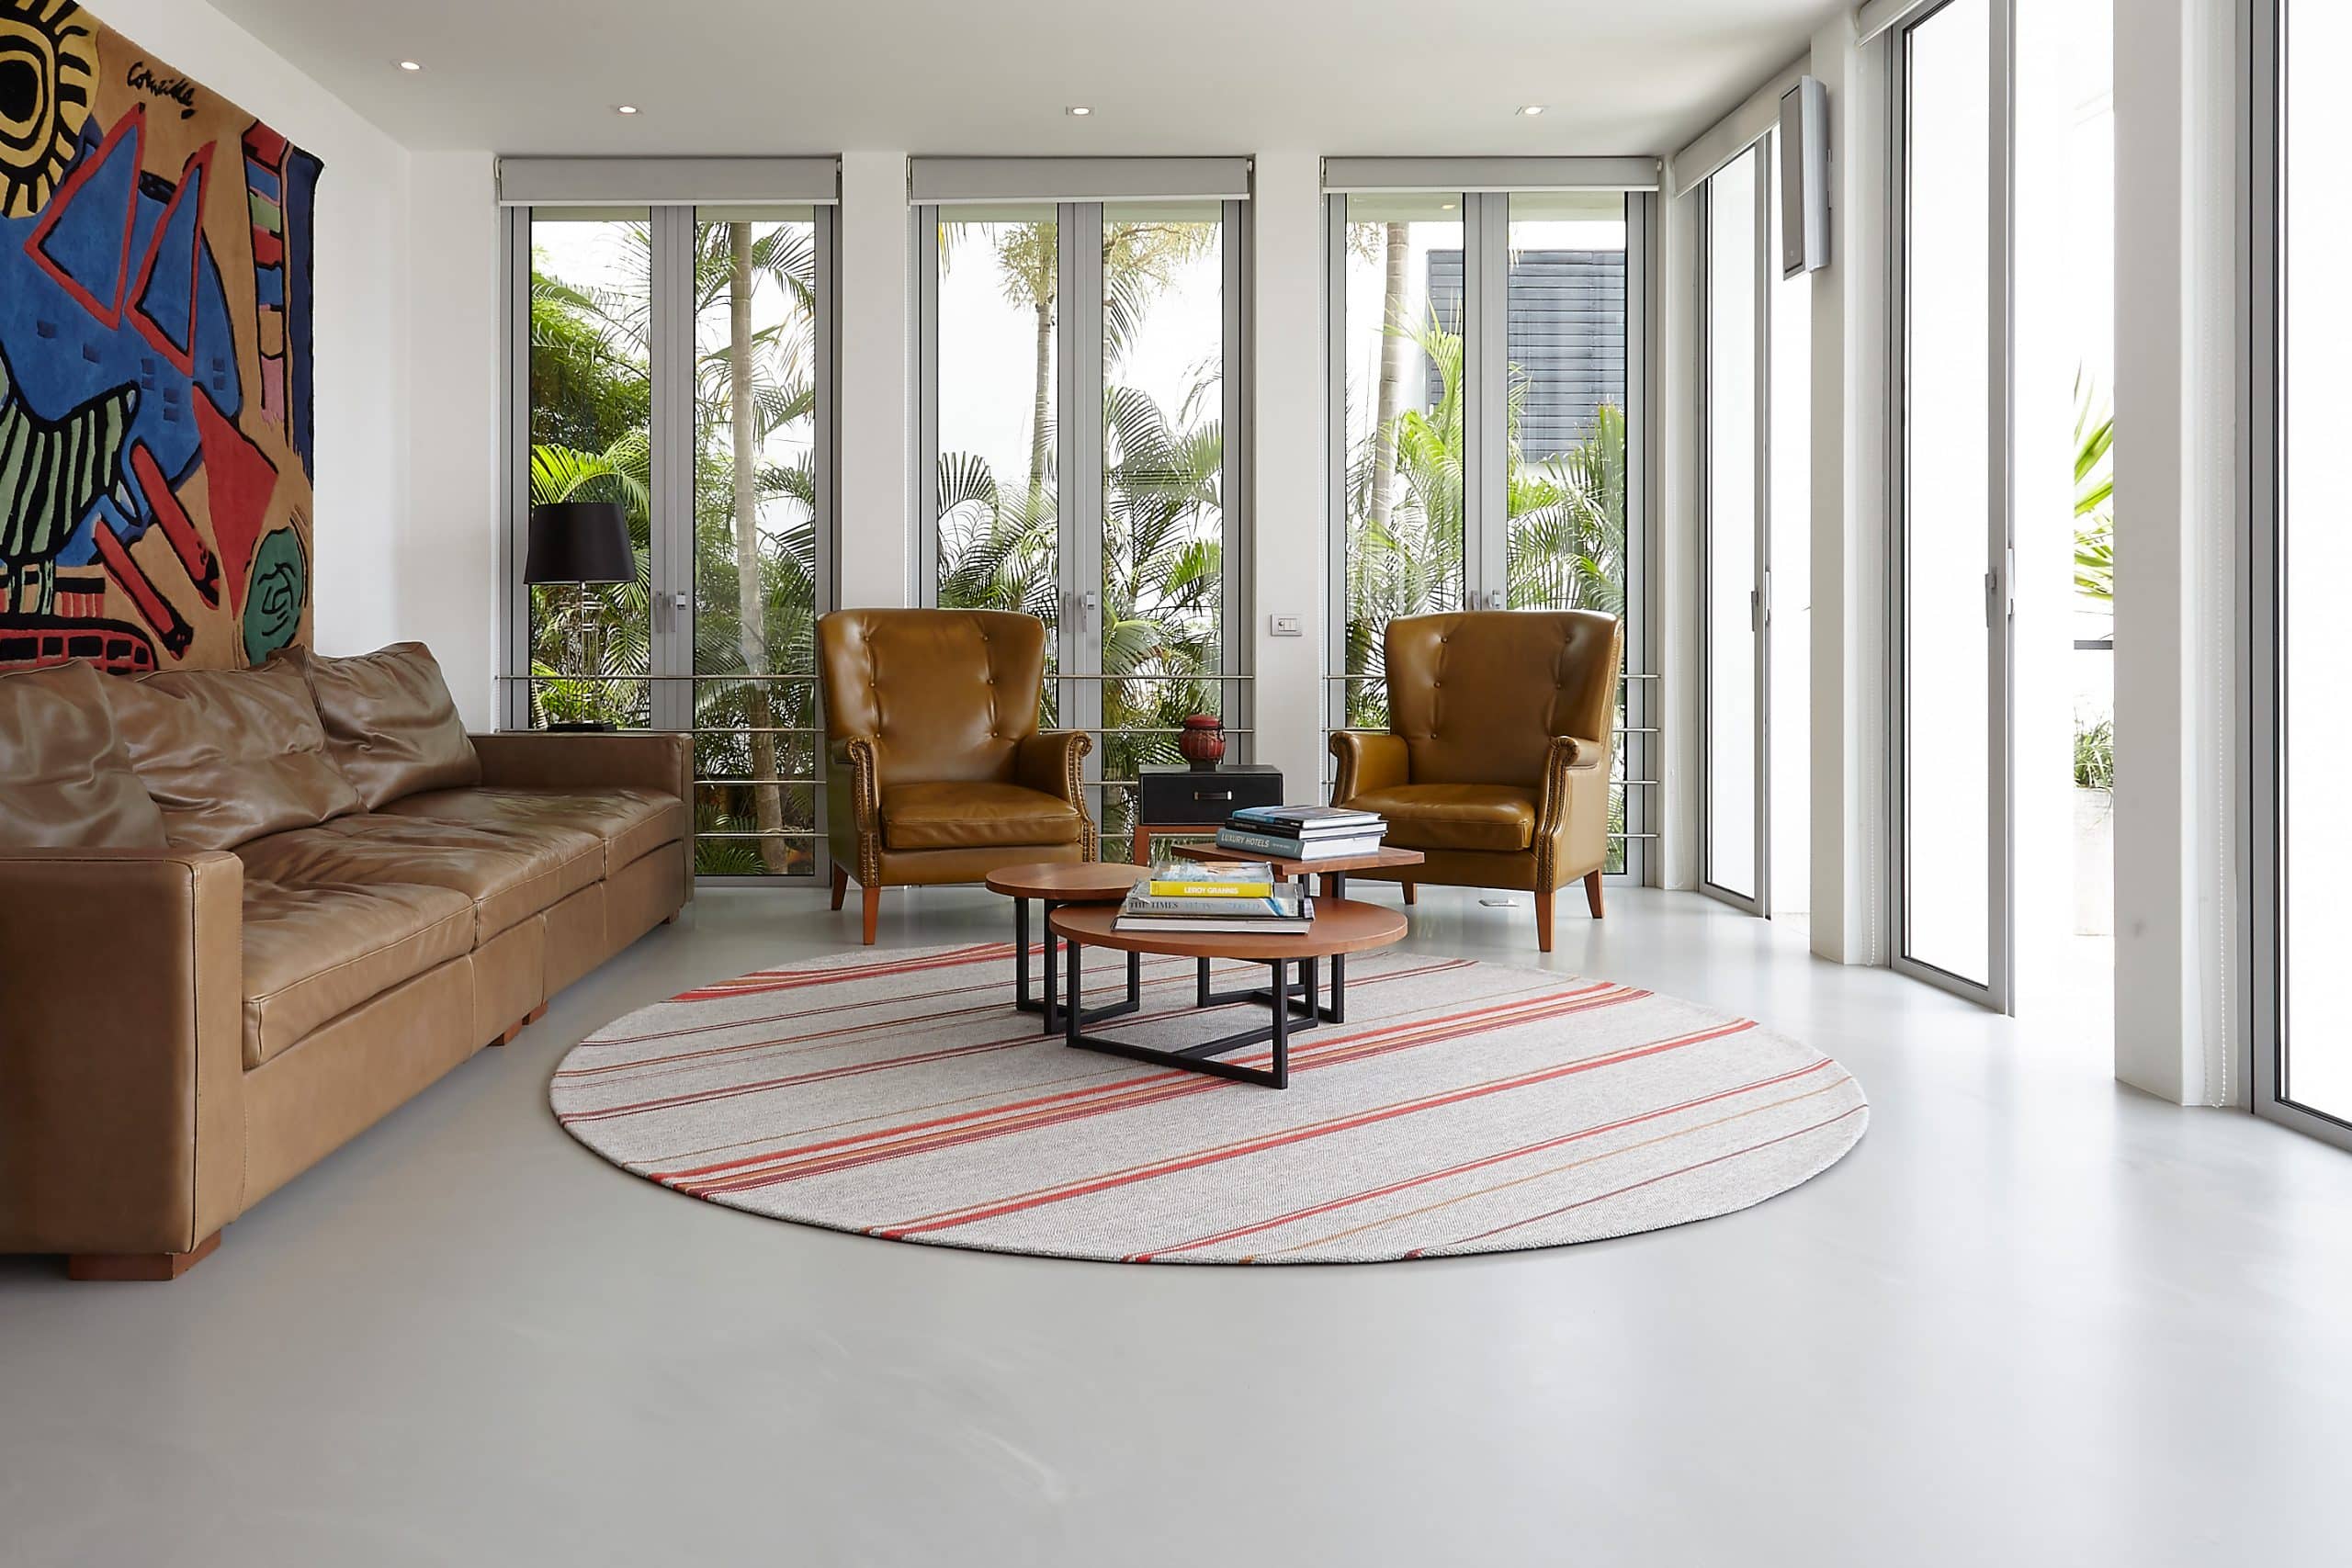 Living space of a coastal style villa. A limited edition belgian rug is located in the center.